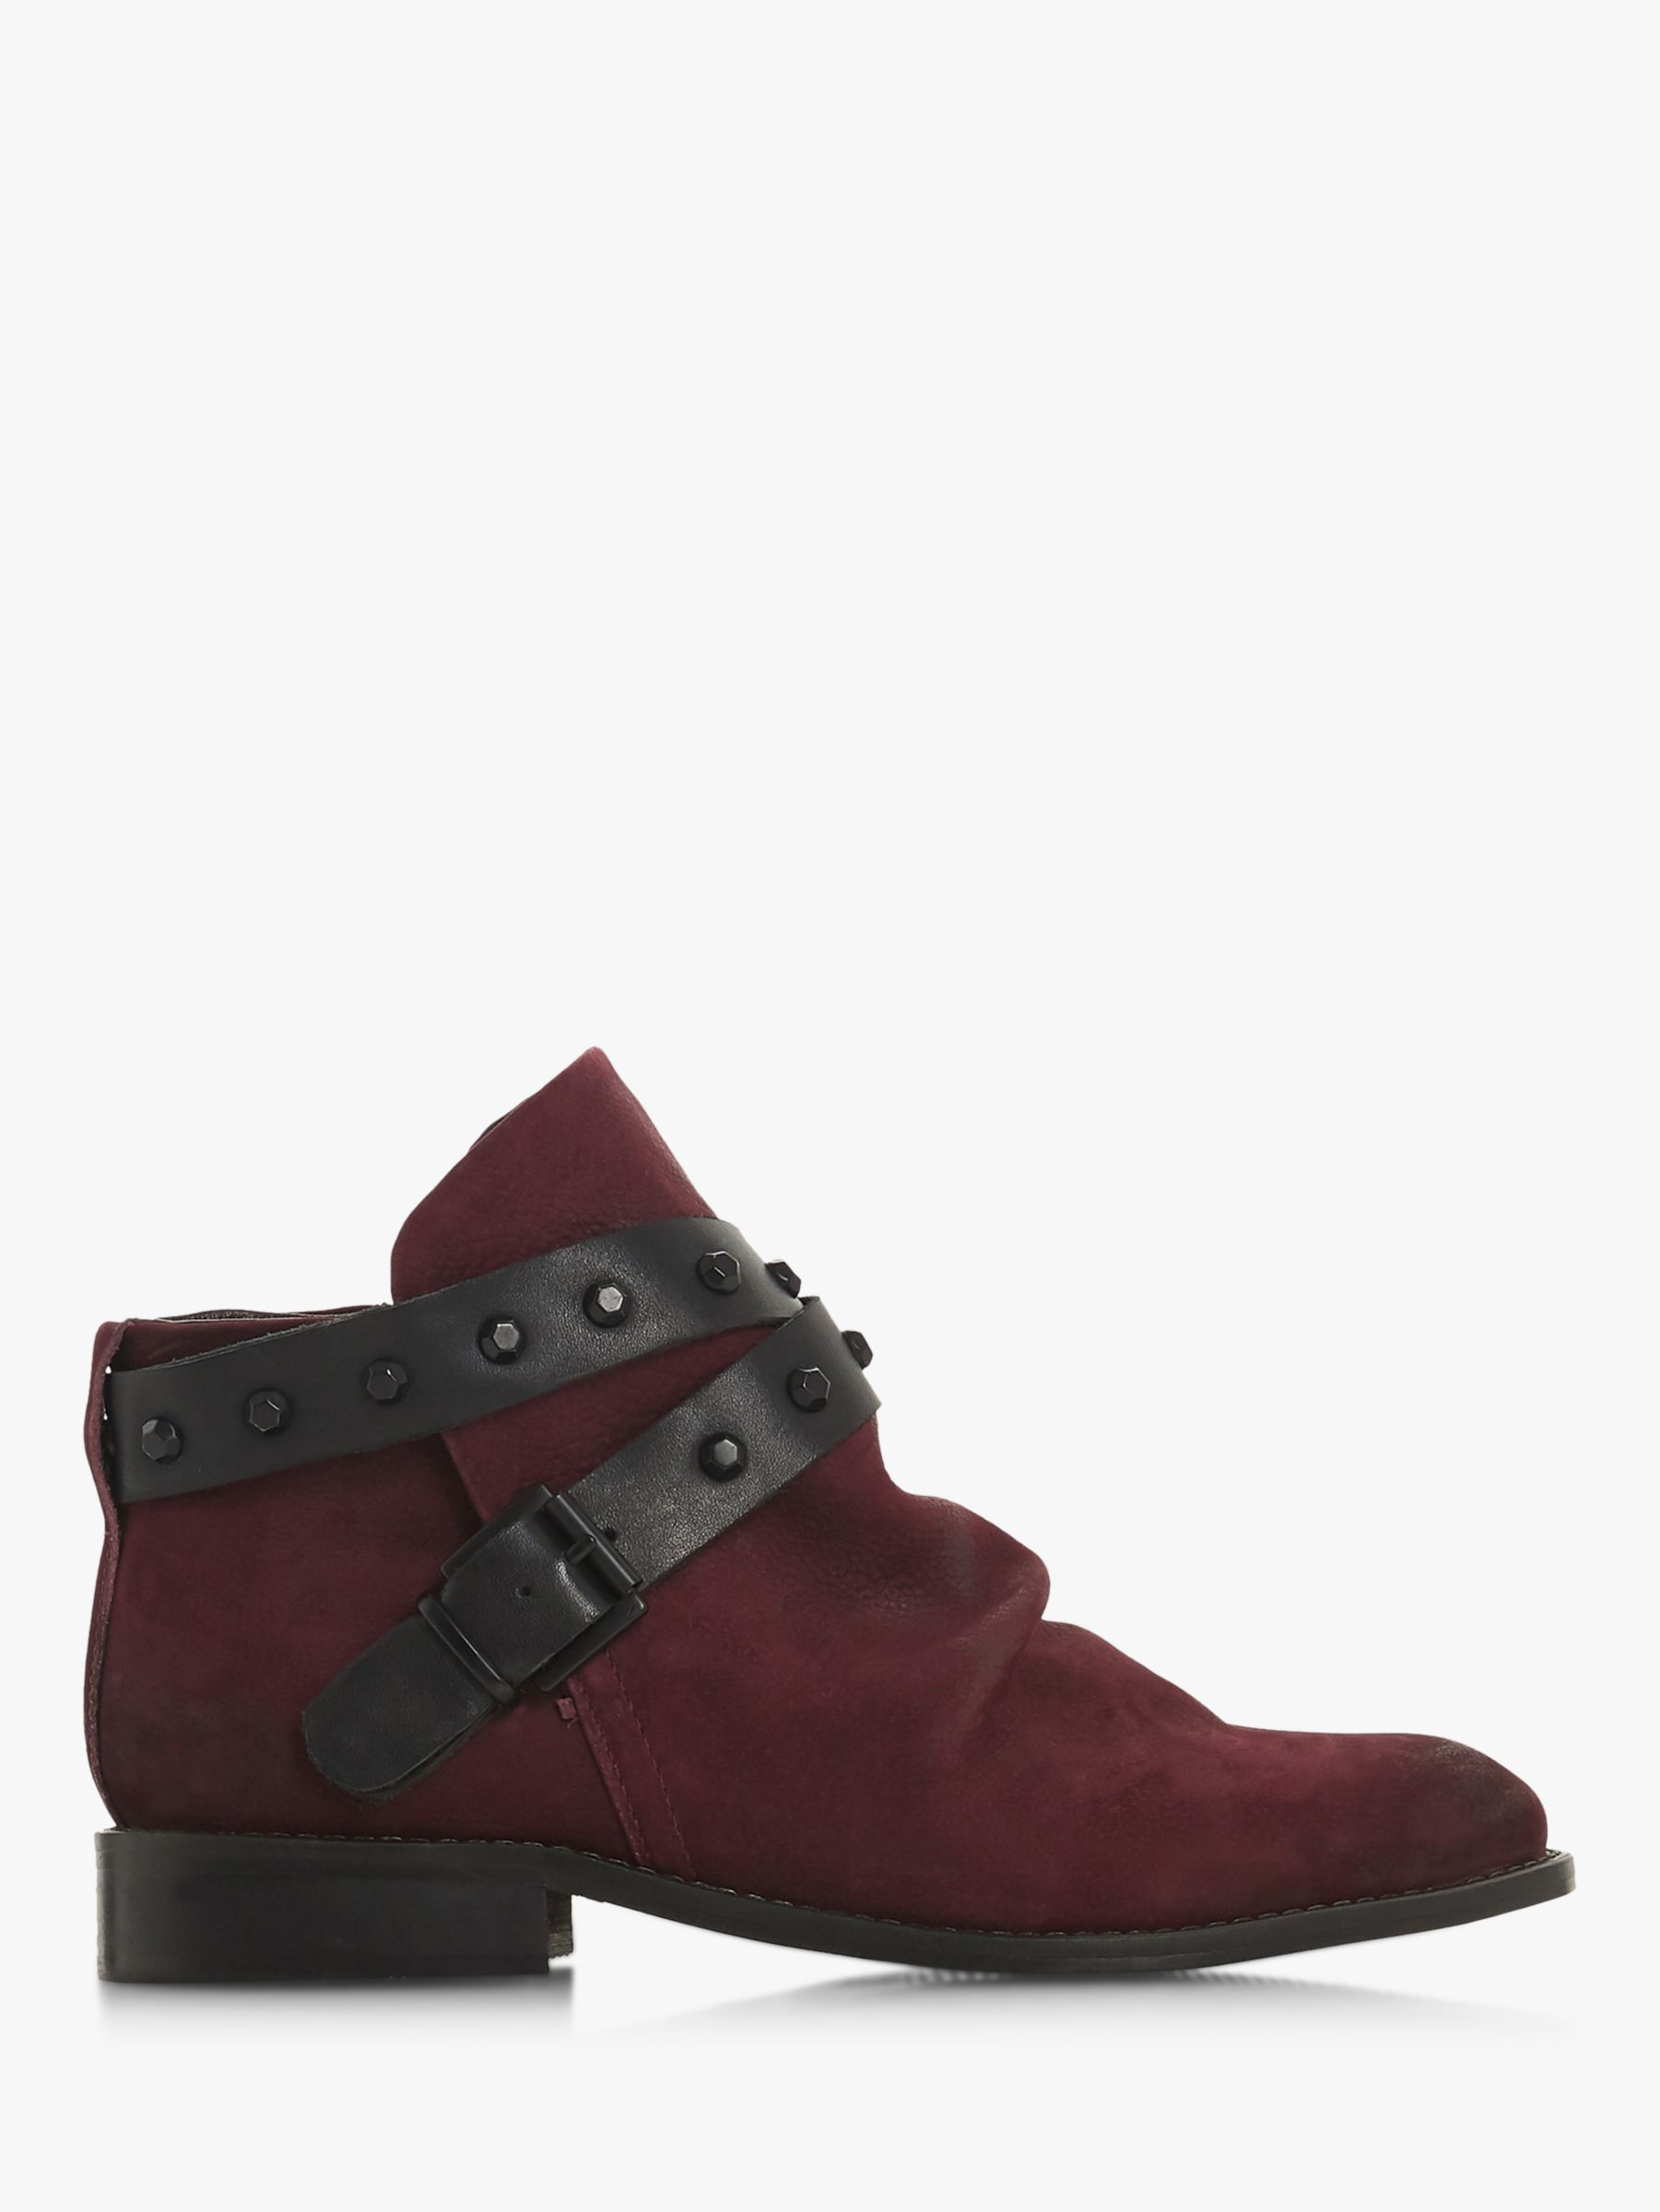 Bertie Portar Wrap Around Buckle Ankle Boots